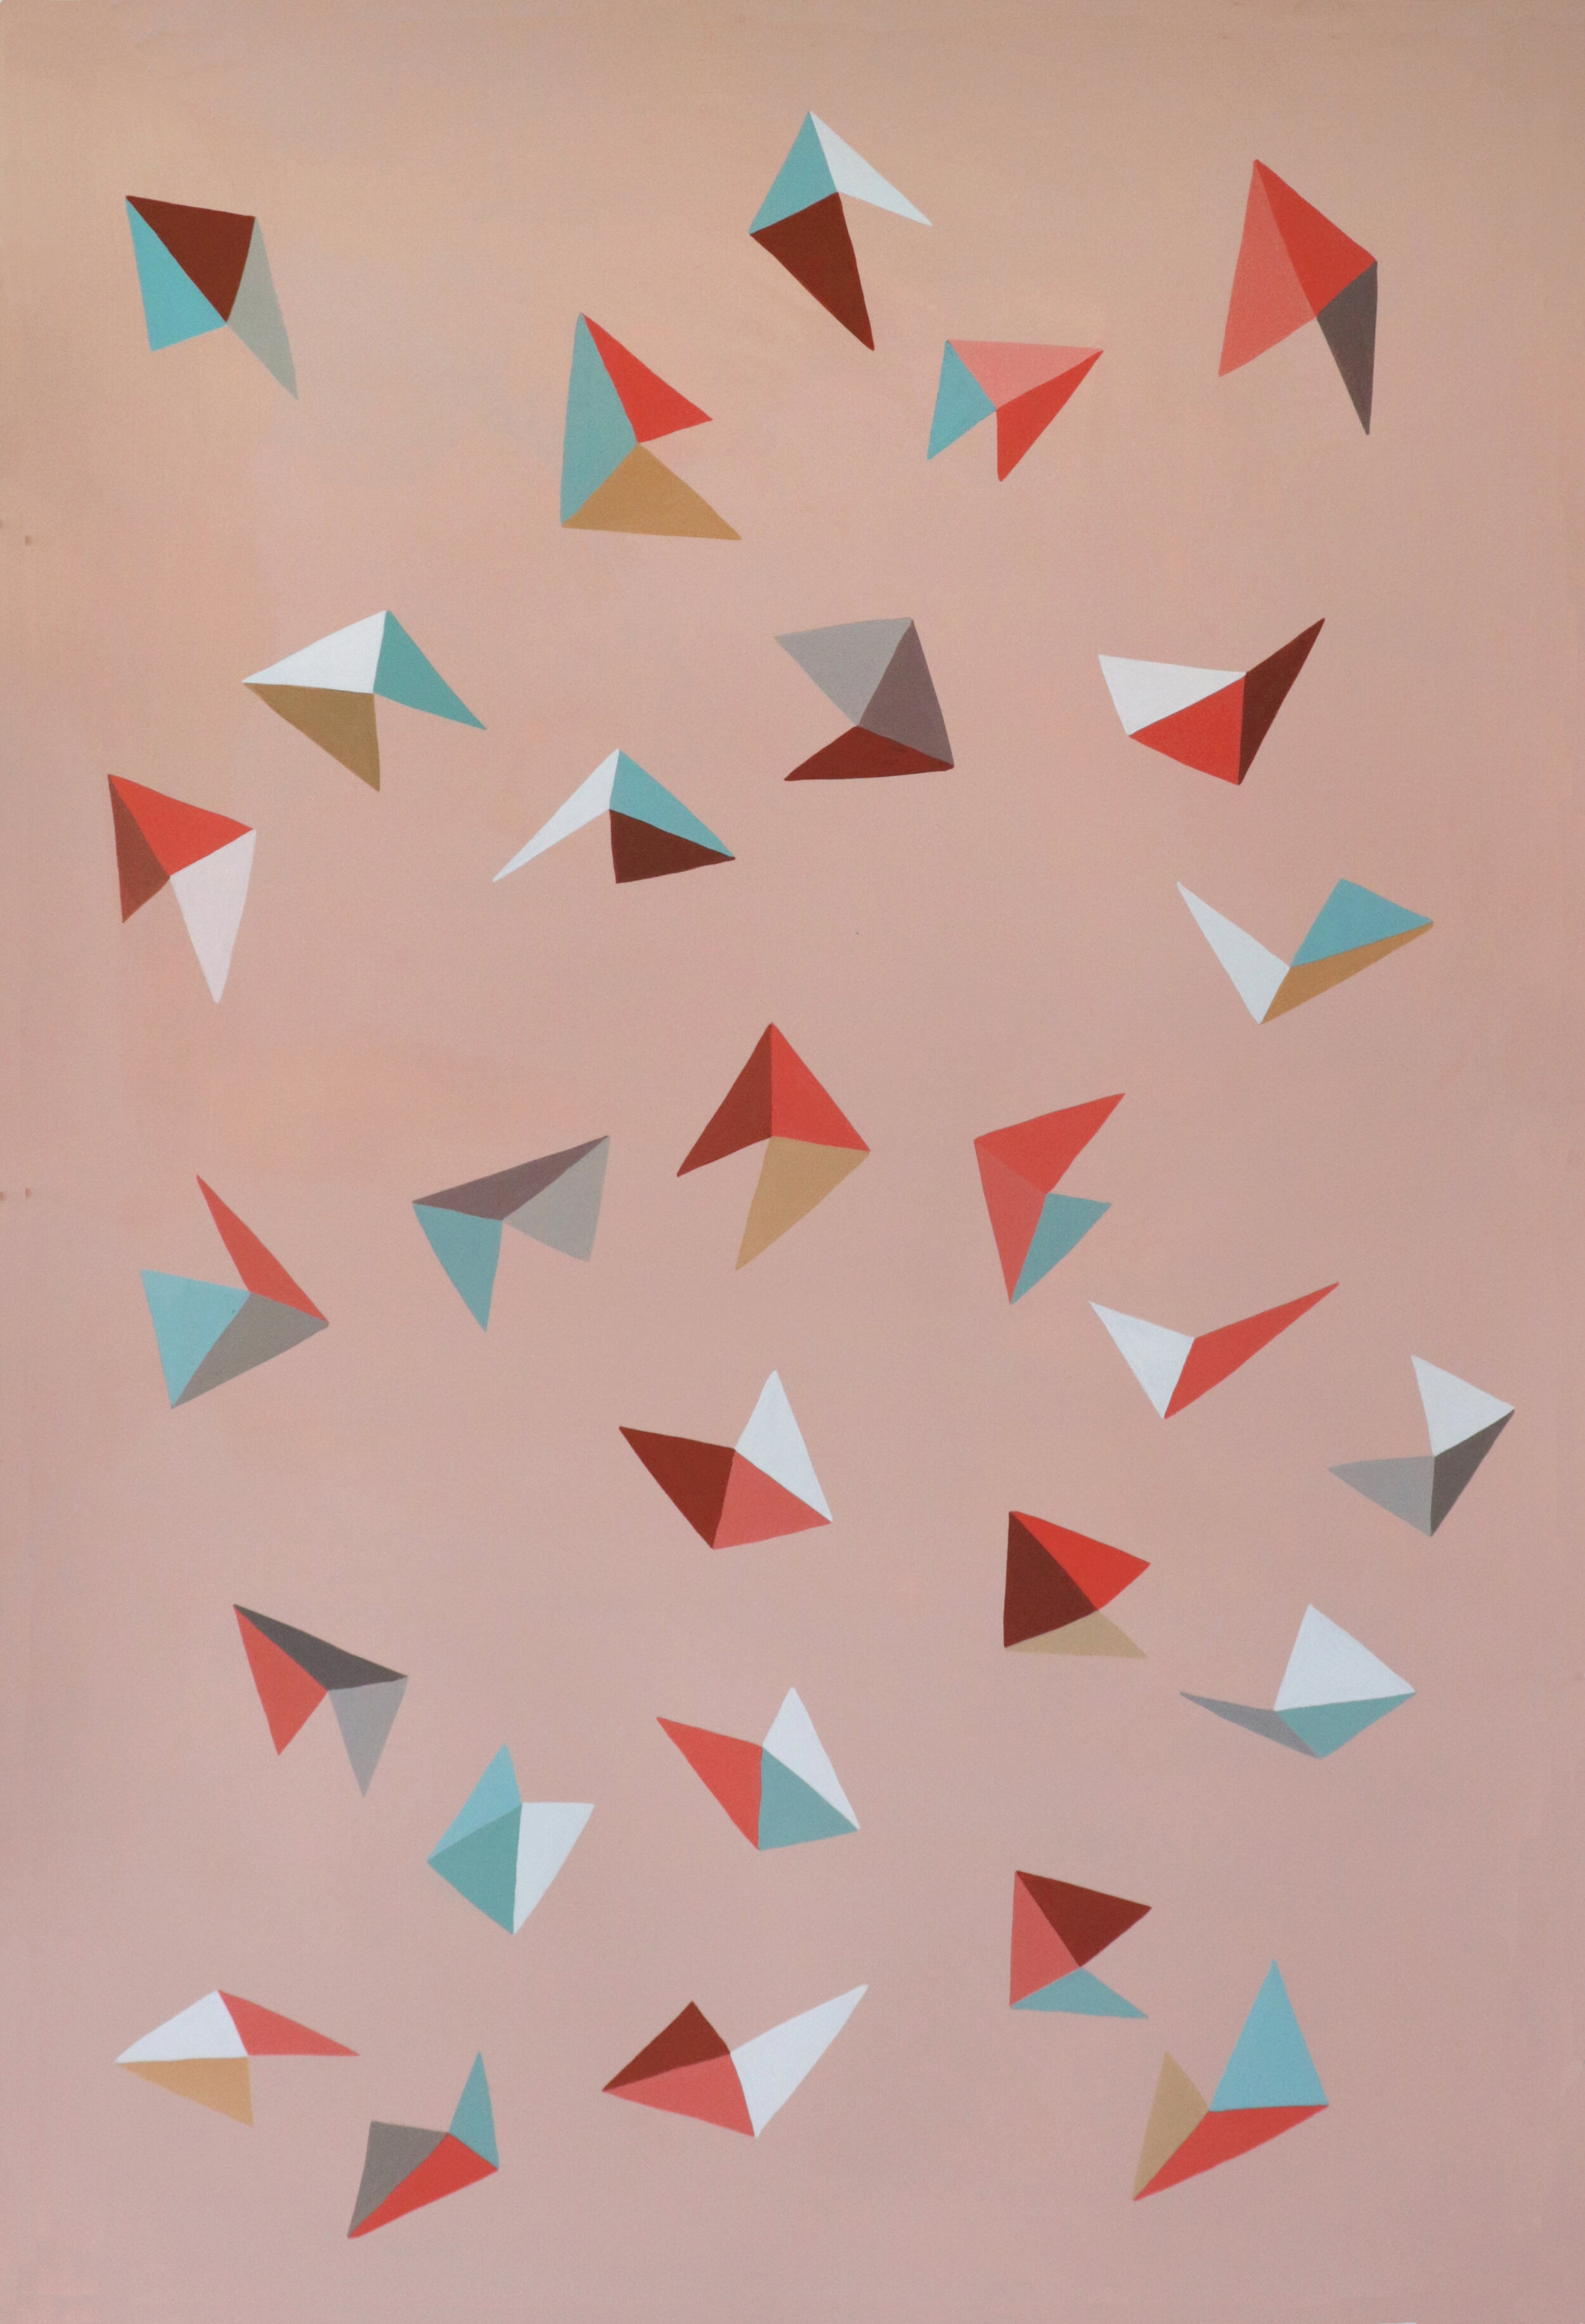 Percival, 2019, 60x40 inches, gouache on paper